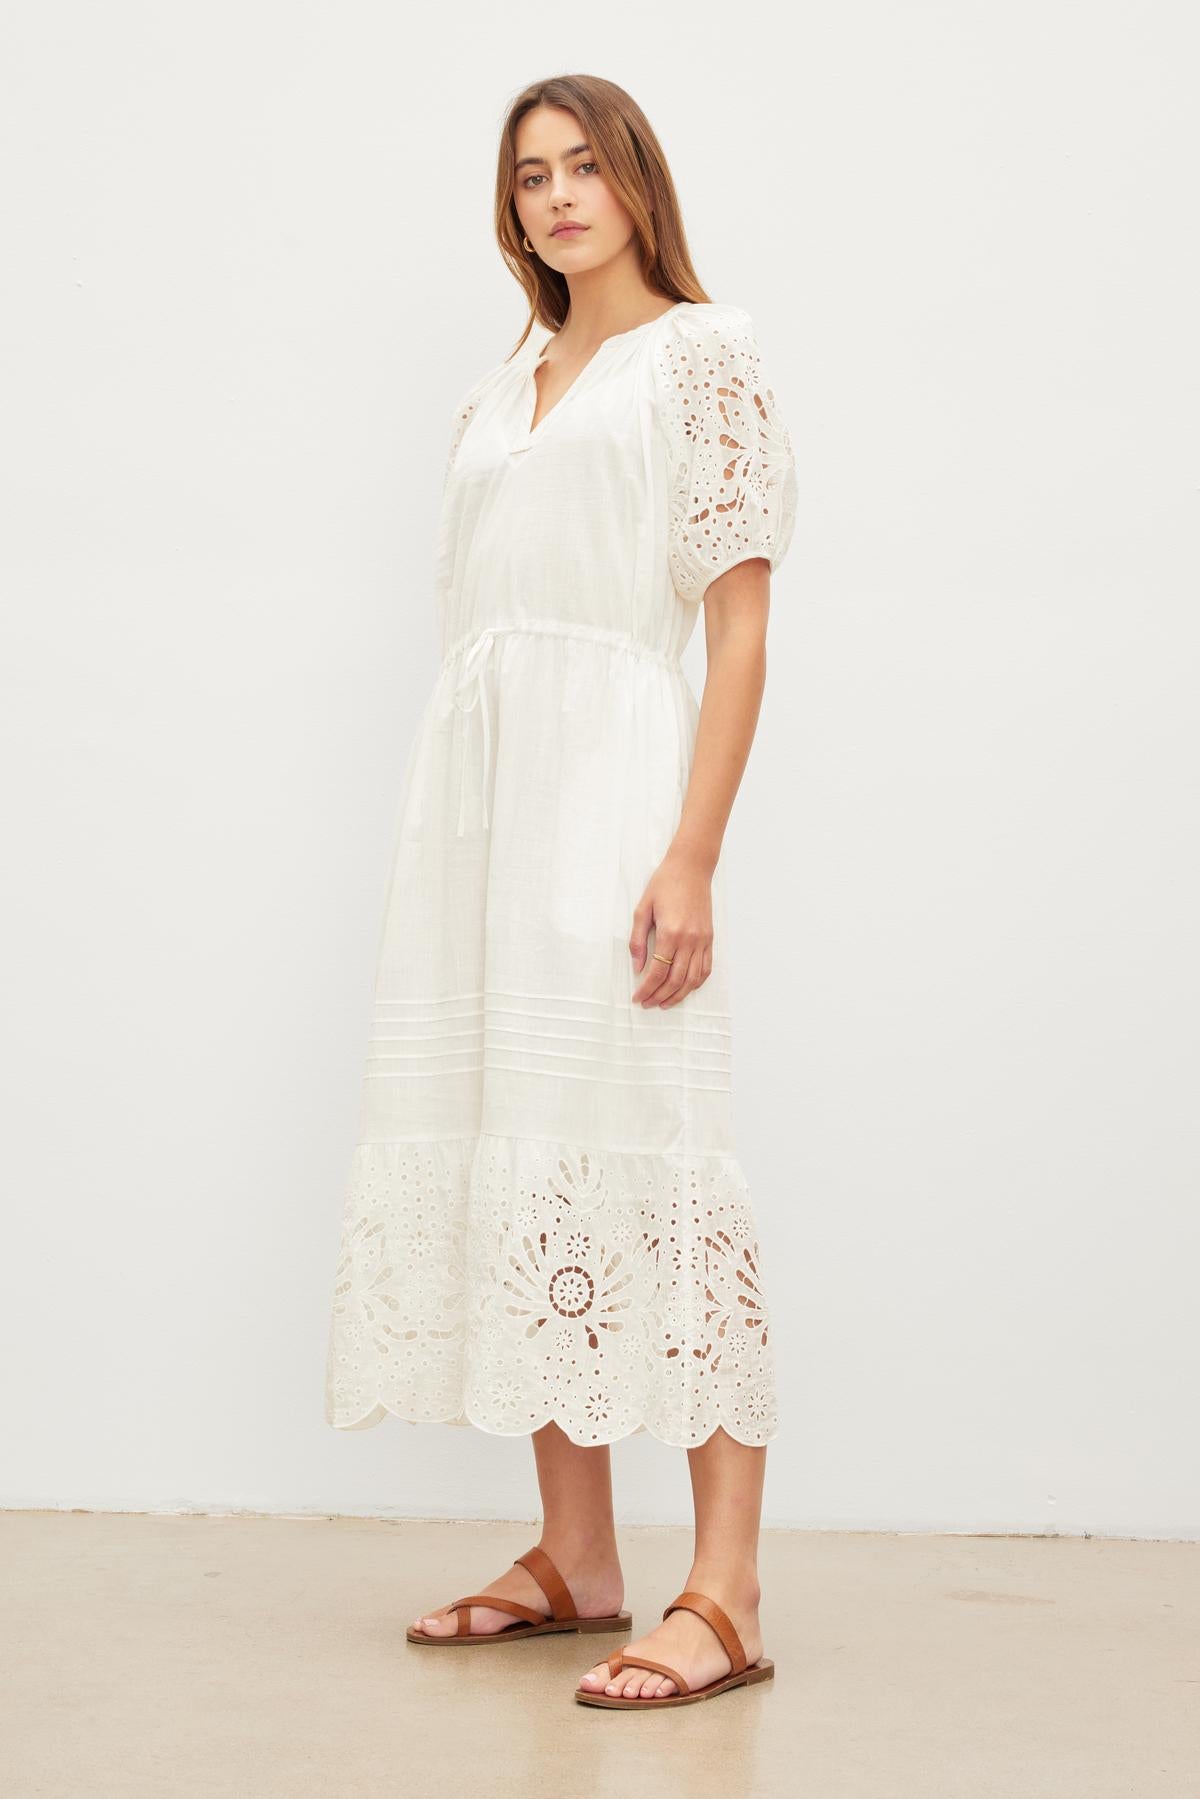   Woman in a white NADIA EMBROIDERED COTTON LACE DRESS with puff sleeves and brown sandals standing against a plain background. (Brand Name: Velvet by Graham & Spencer) 